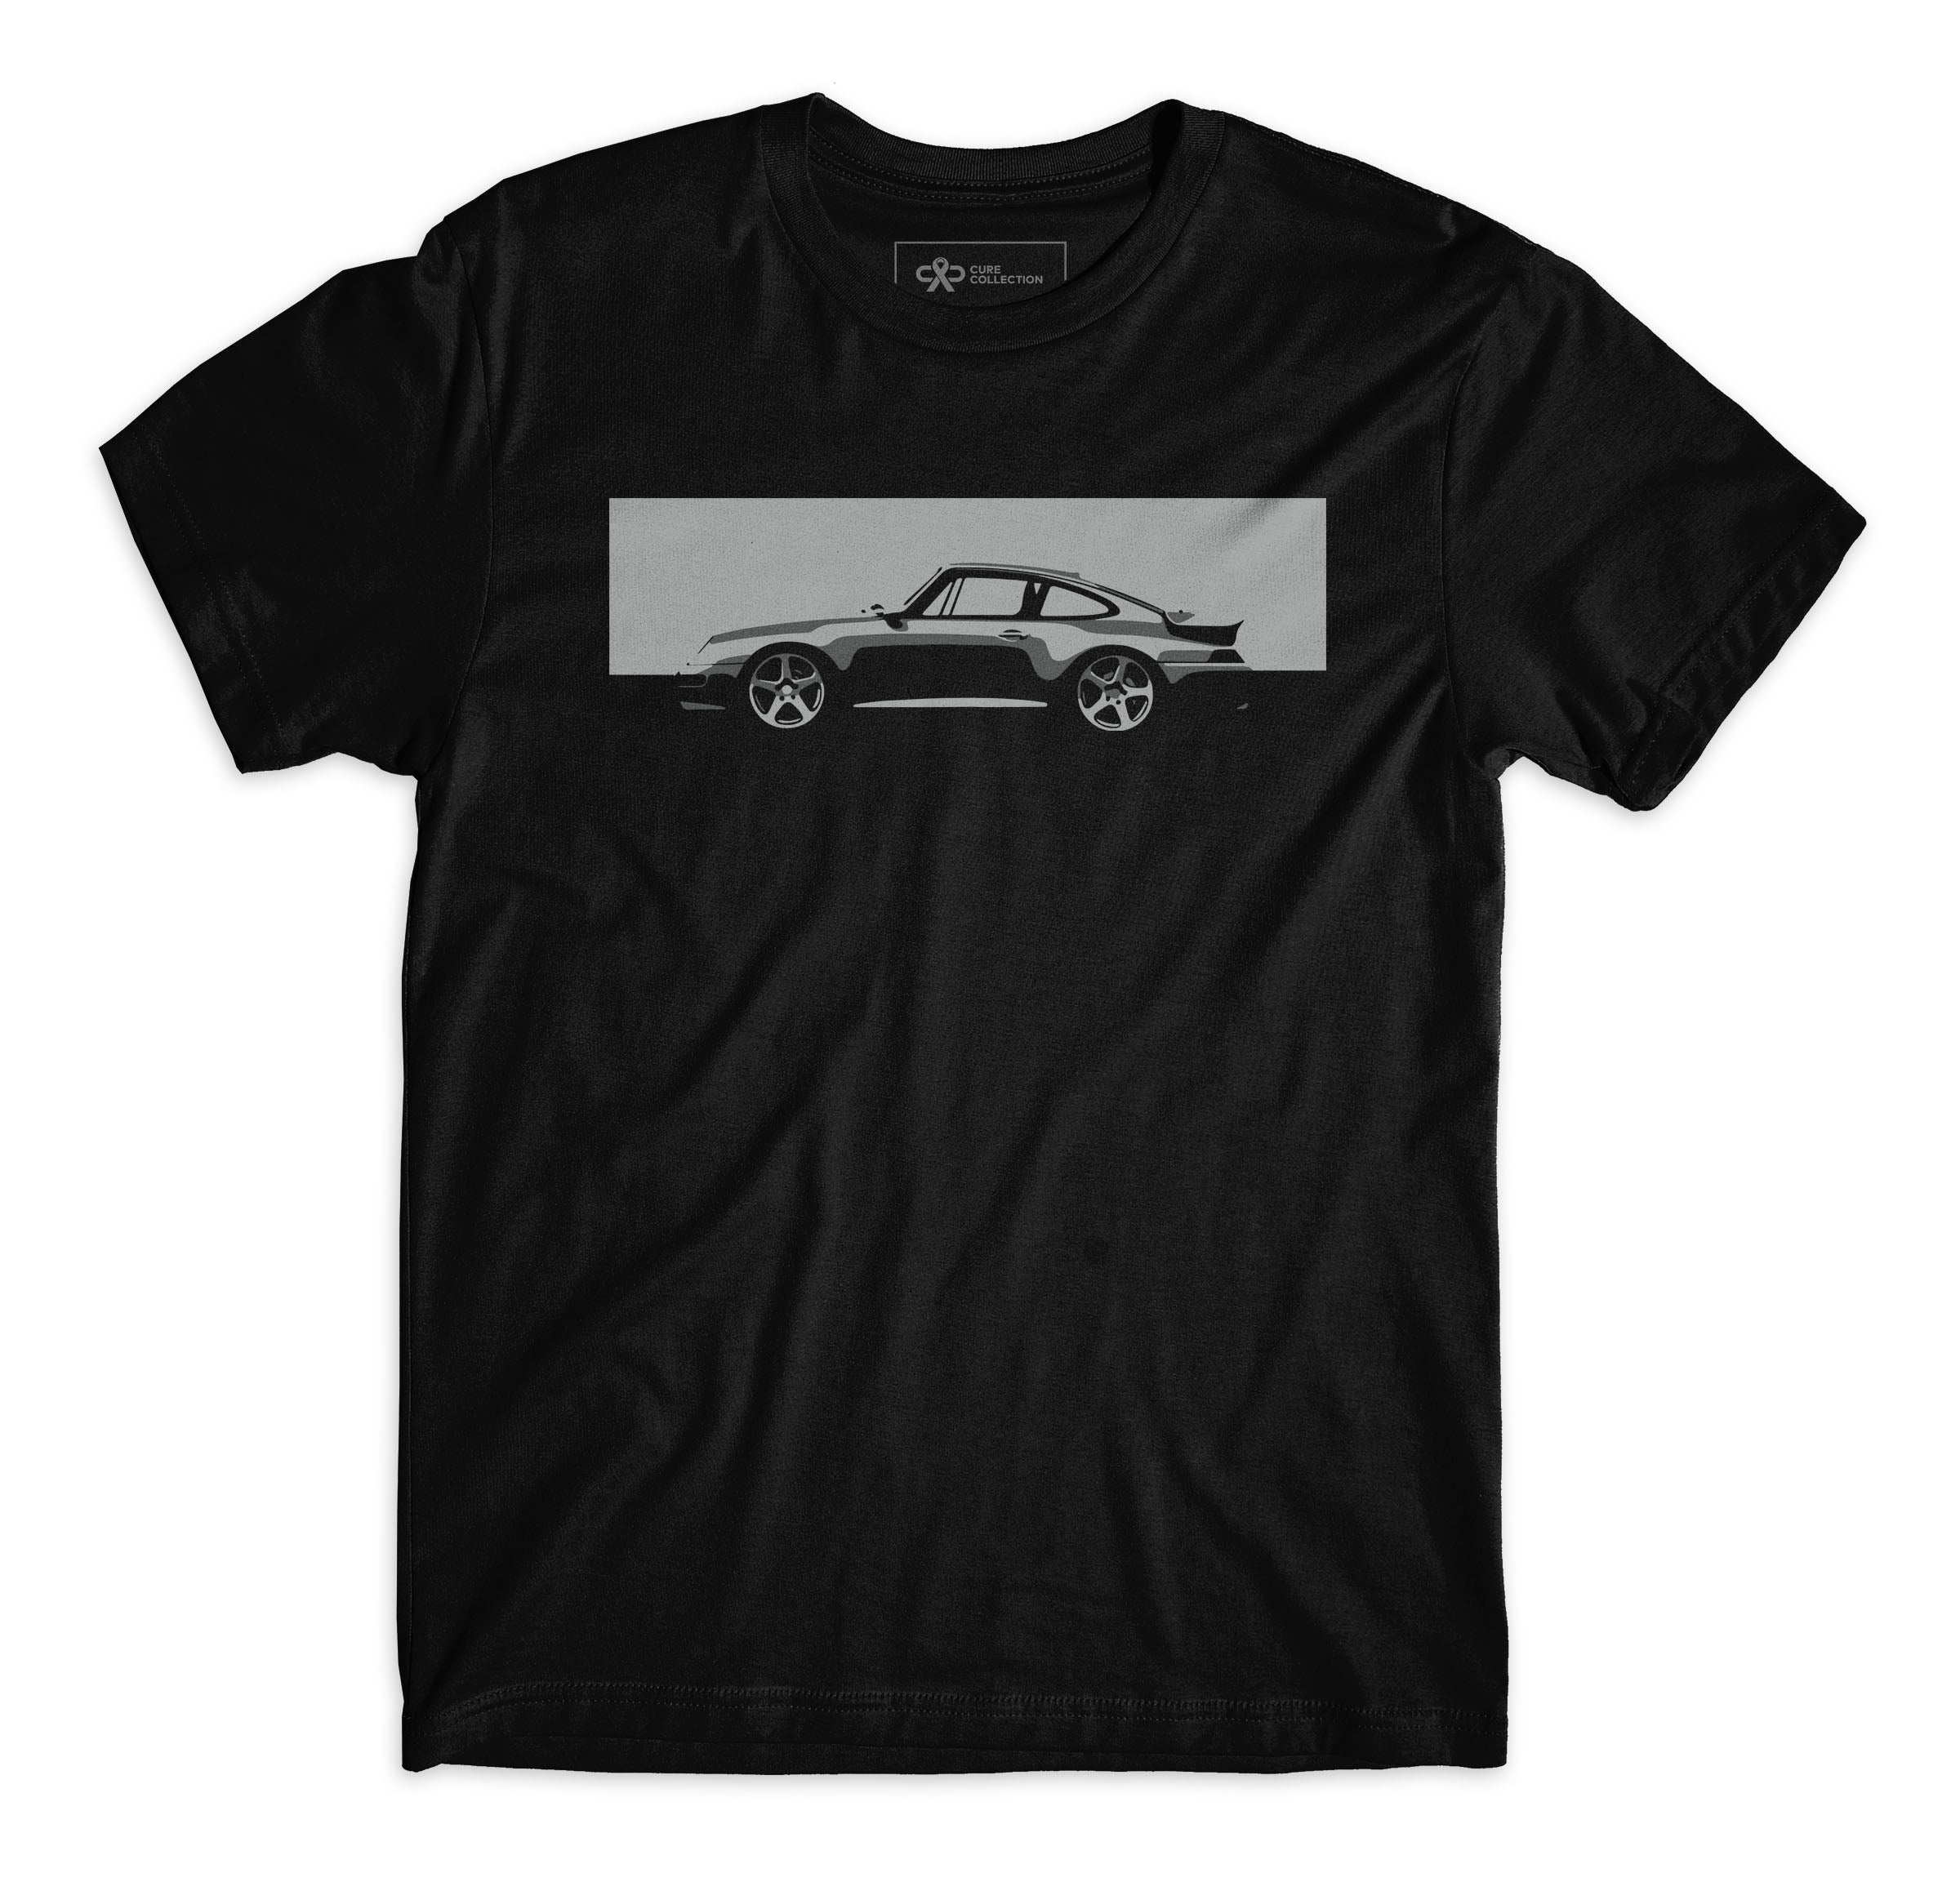 Cure Collection | Classic Car T-Shirts | Apparel that gives back